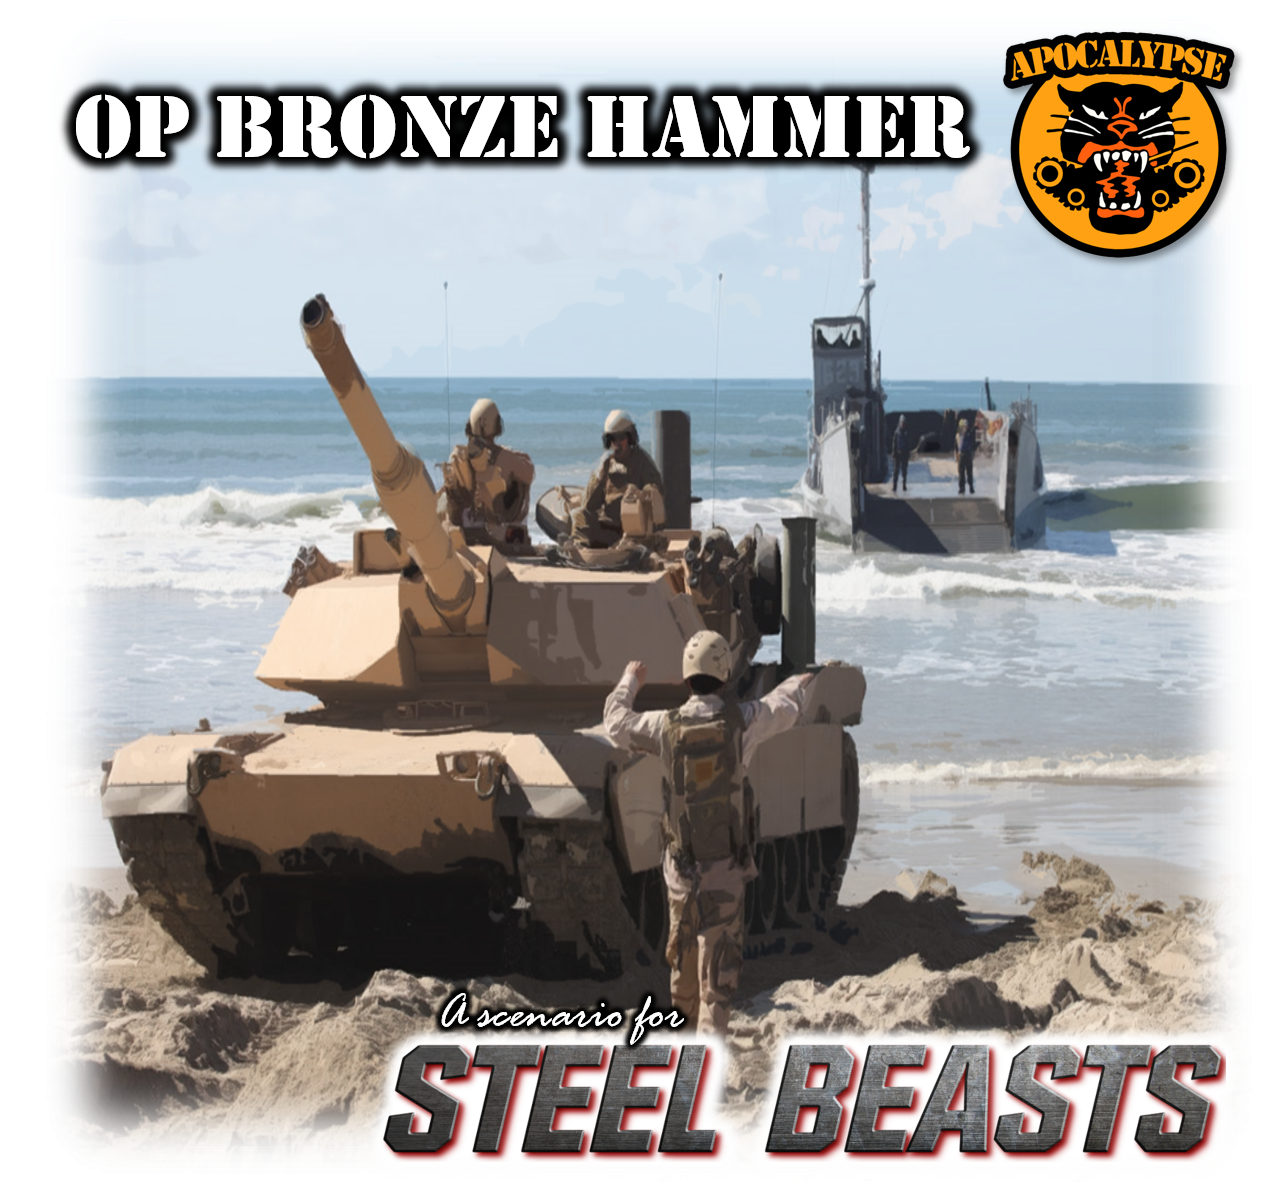 More information about "Operation Bronze Hammer"